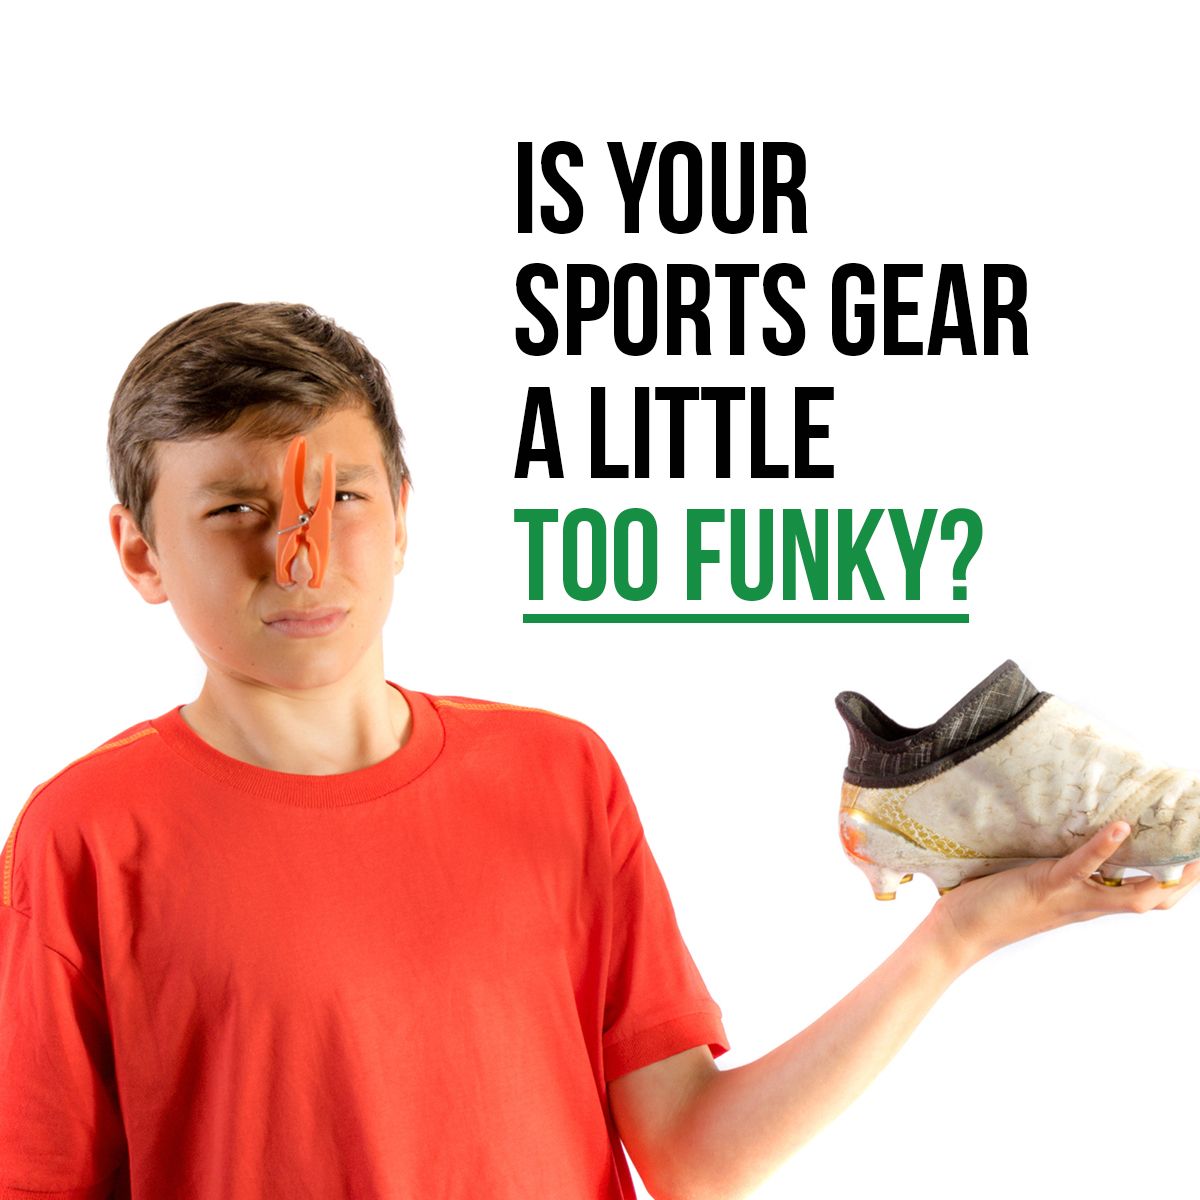 Is Your Sports Gear a Little Too Funky?